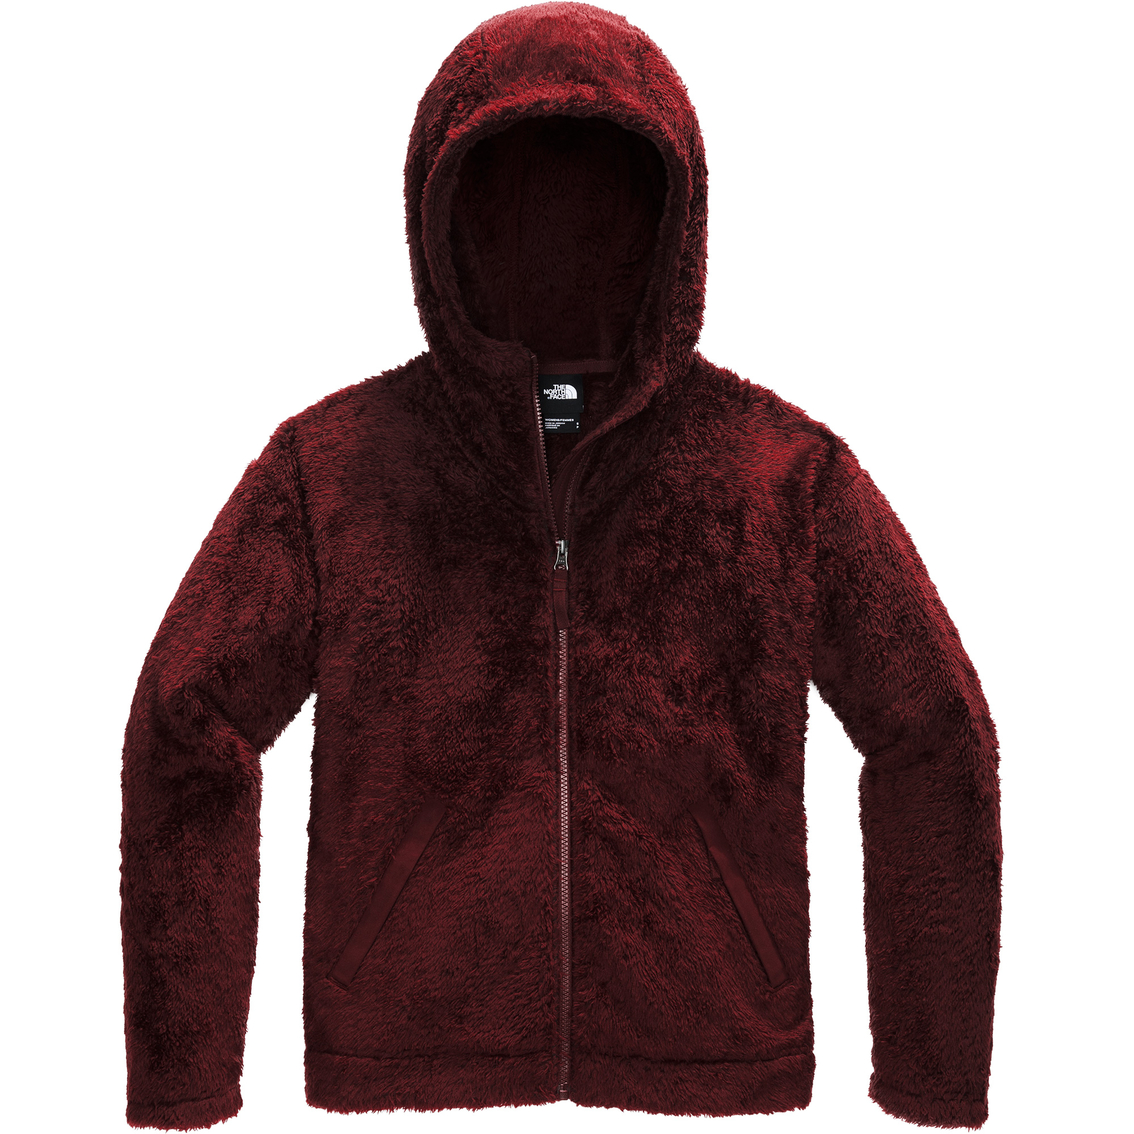 The North Face Furry Fleece FZ Hoodie - Image 3 of 3